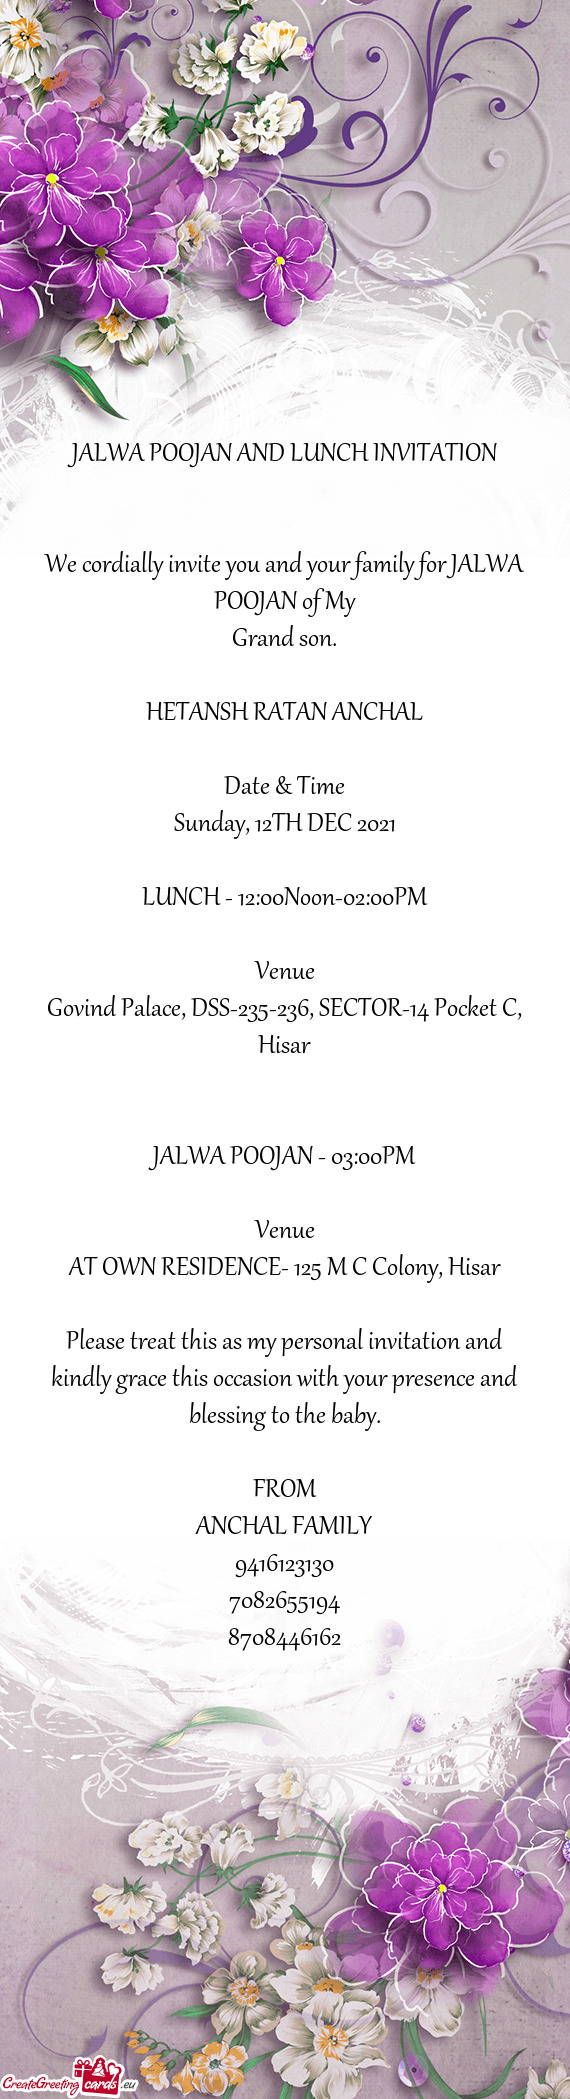 We cordially invite you and your family for JALWA POOJAN of My